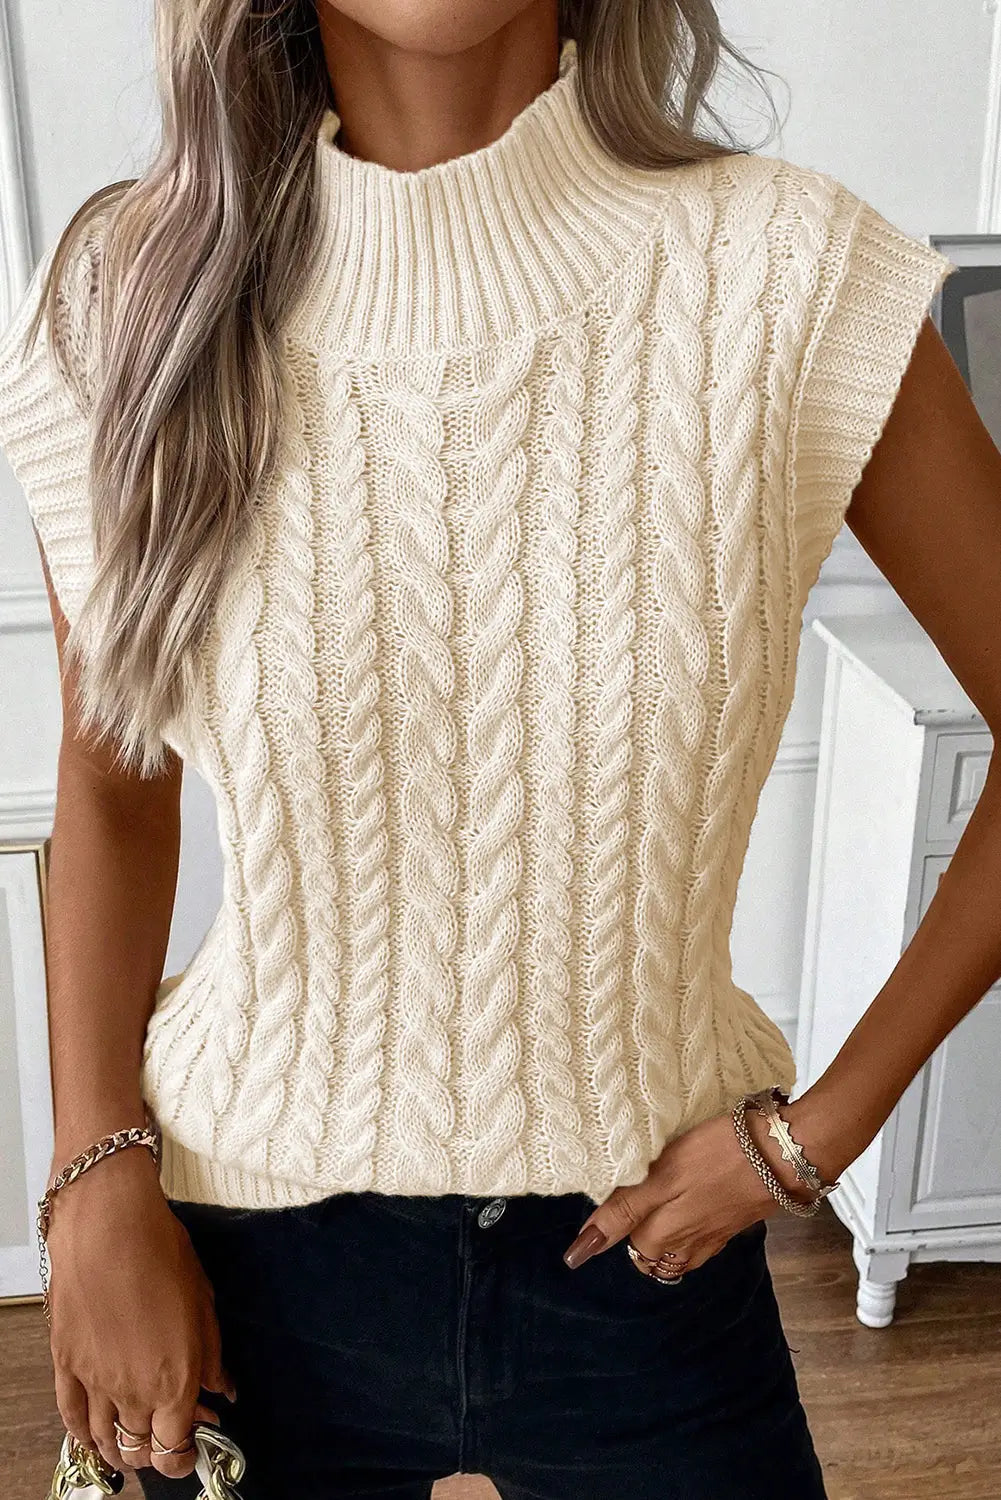 Oatmeal cable knit high neck sweater vest - sweaters & cardigans